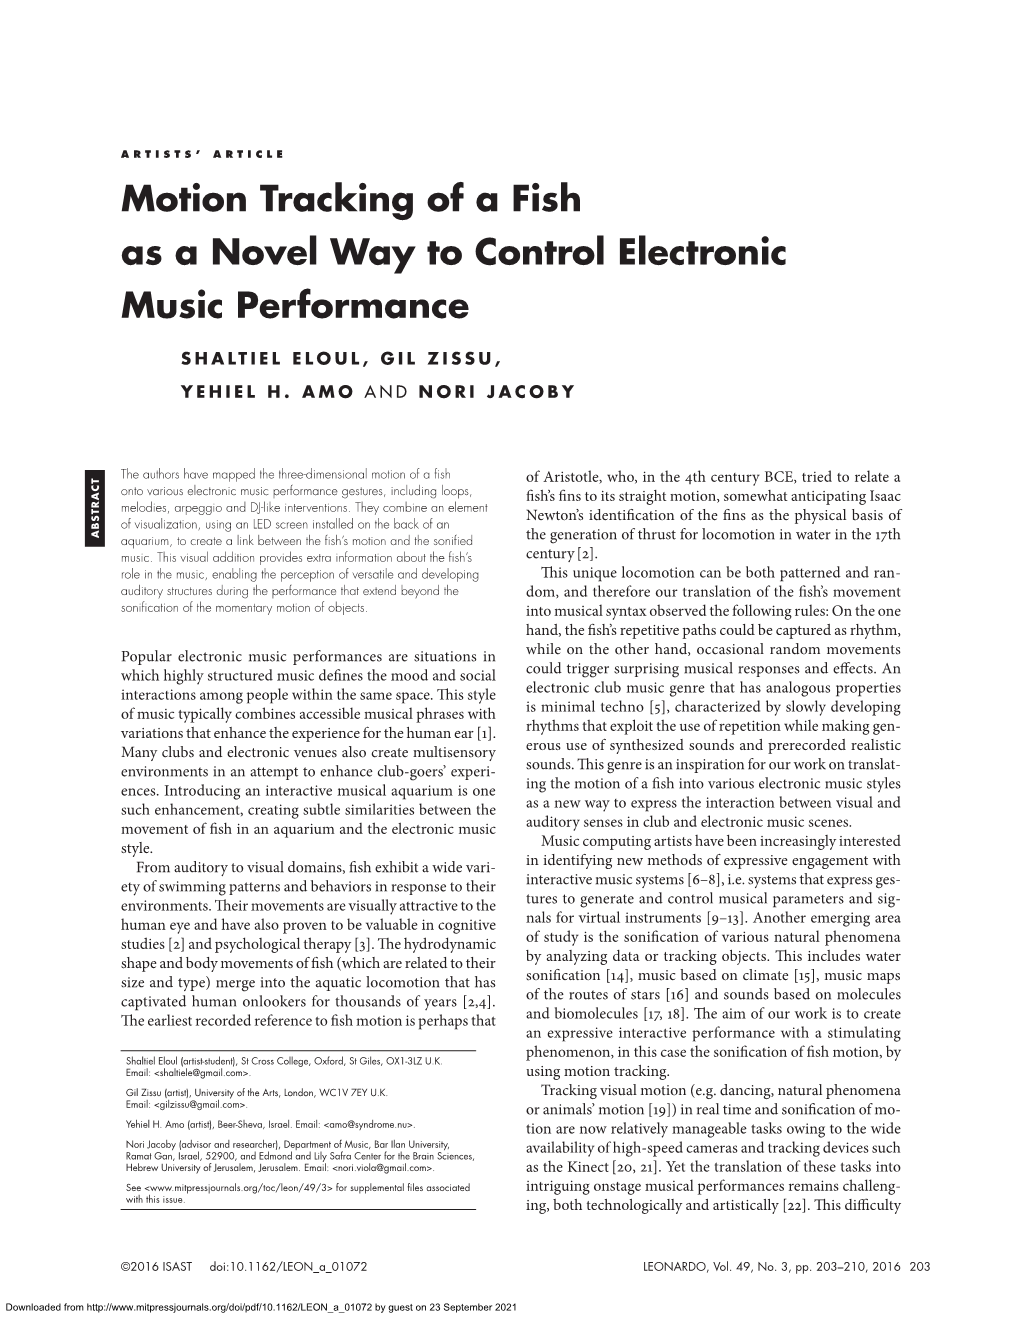 Motion Tracking of a Fish As a Novel Way to Control Electronic Music Performance